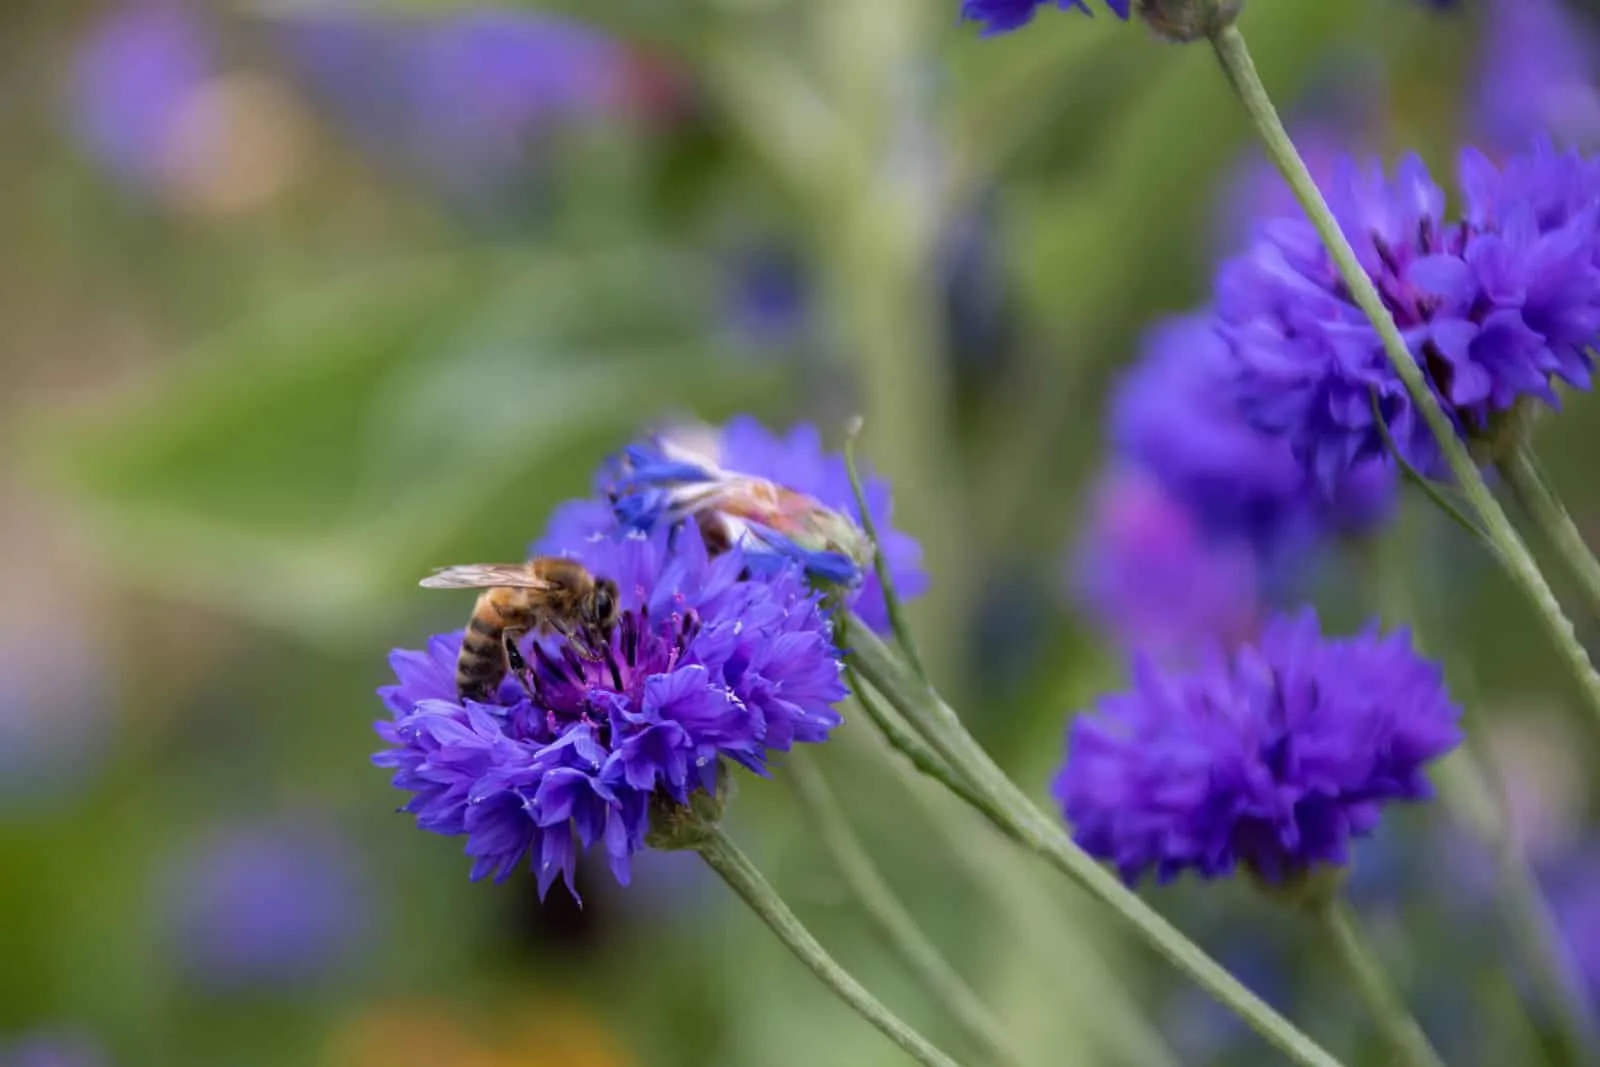 western honeybee collecting pollen from bright blue flower of the cornflower also known as bachelor's button